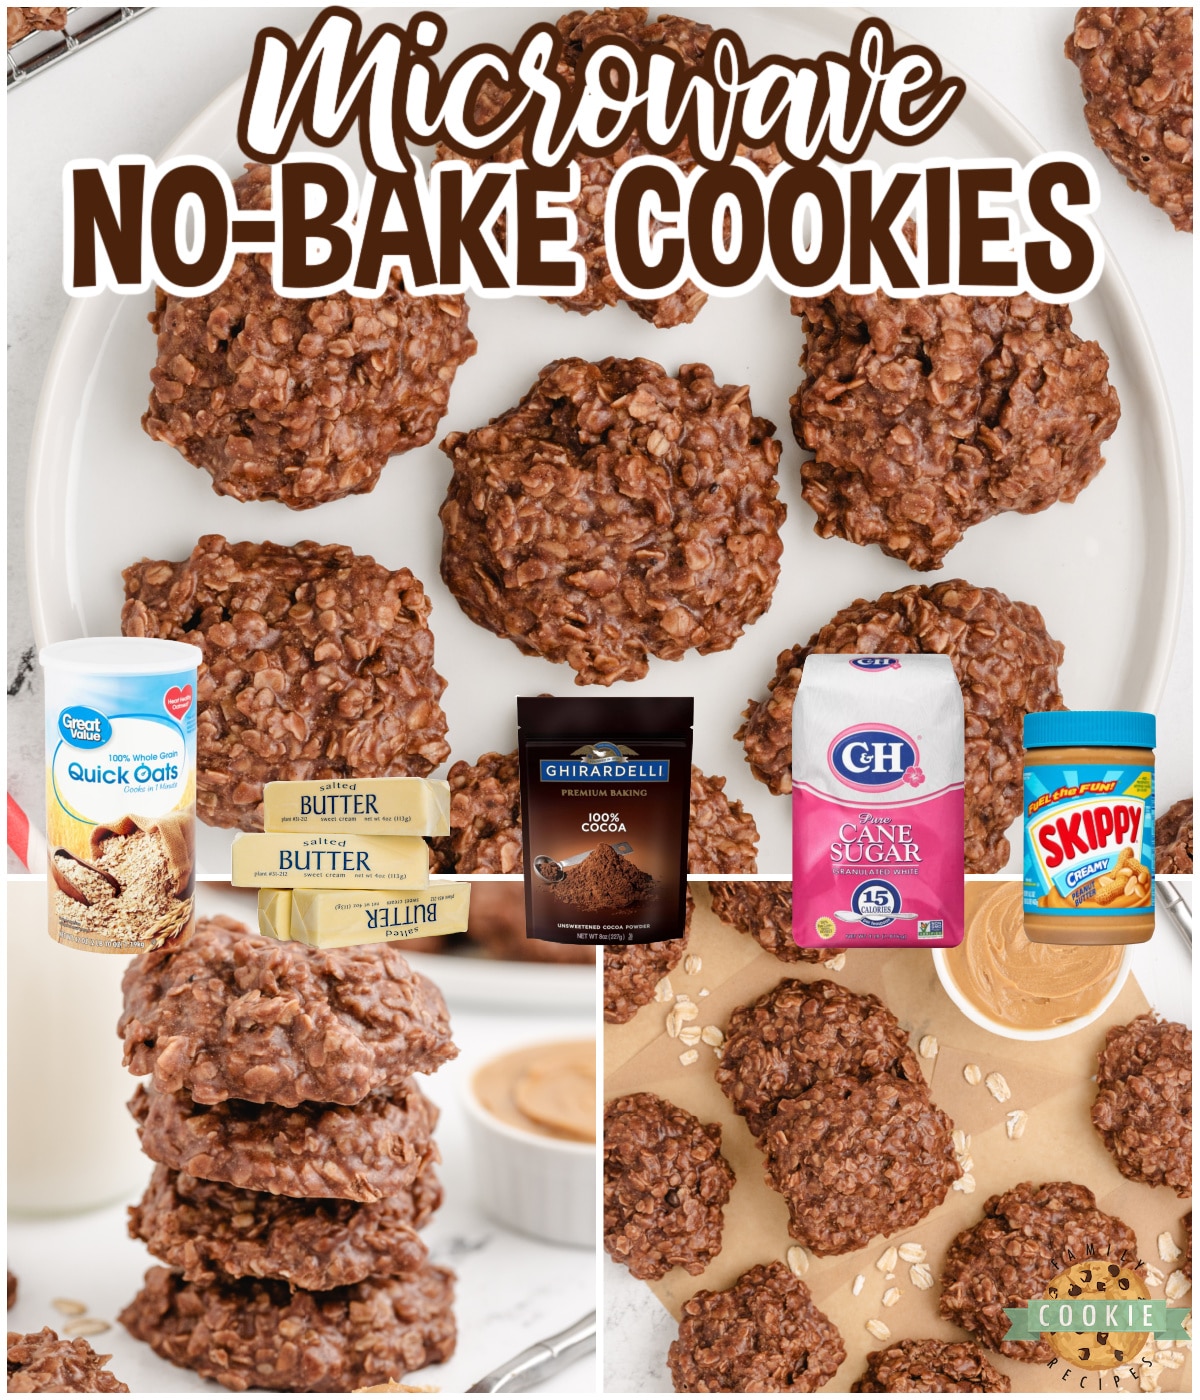 Microwave No-Bake Cookies are made with only six ingredients in less than 10 minutes, and no stove is necessary. Delicious no-bake cookie recipe made with oats, peanut butter, and cocoa powder. 